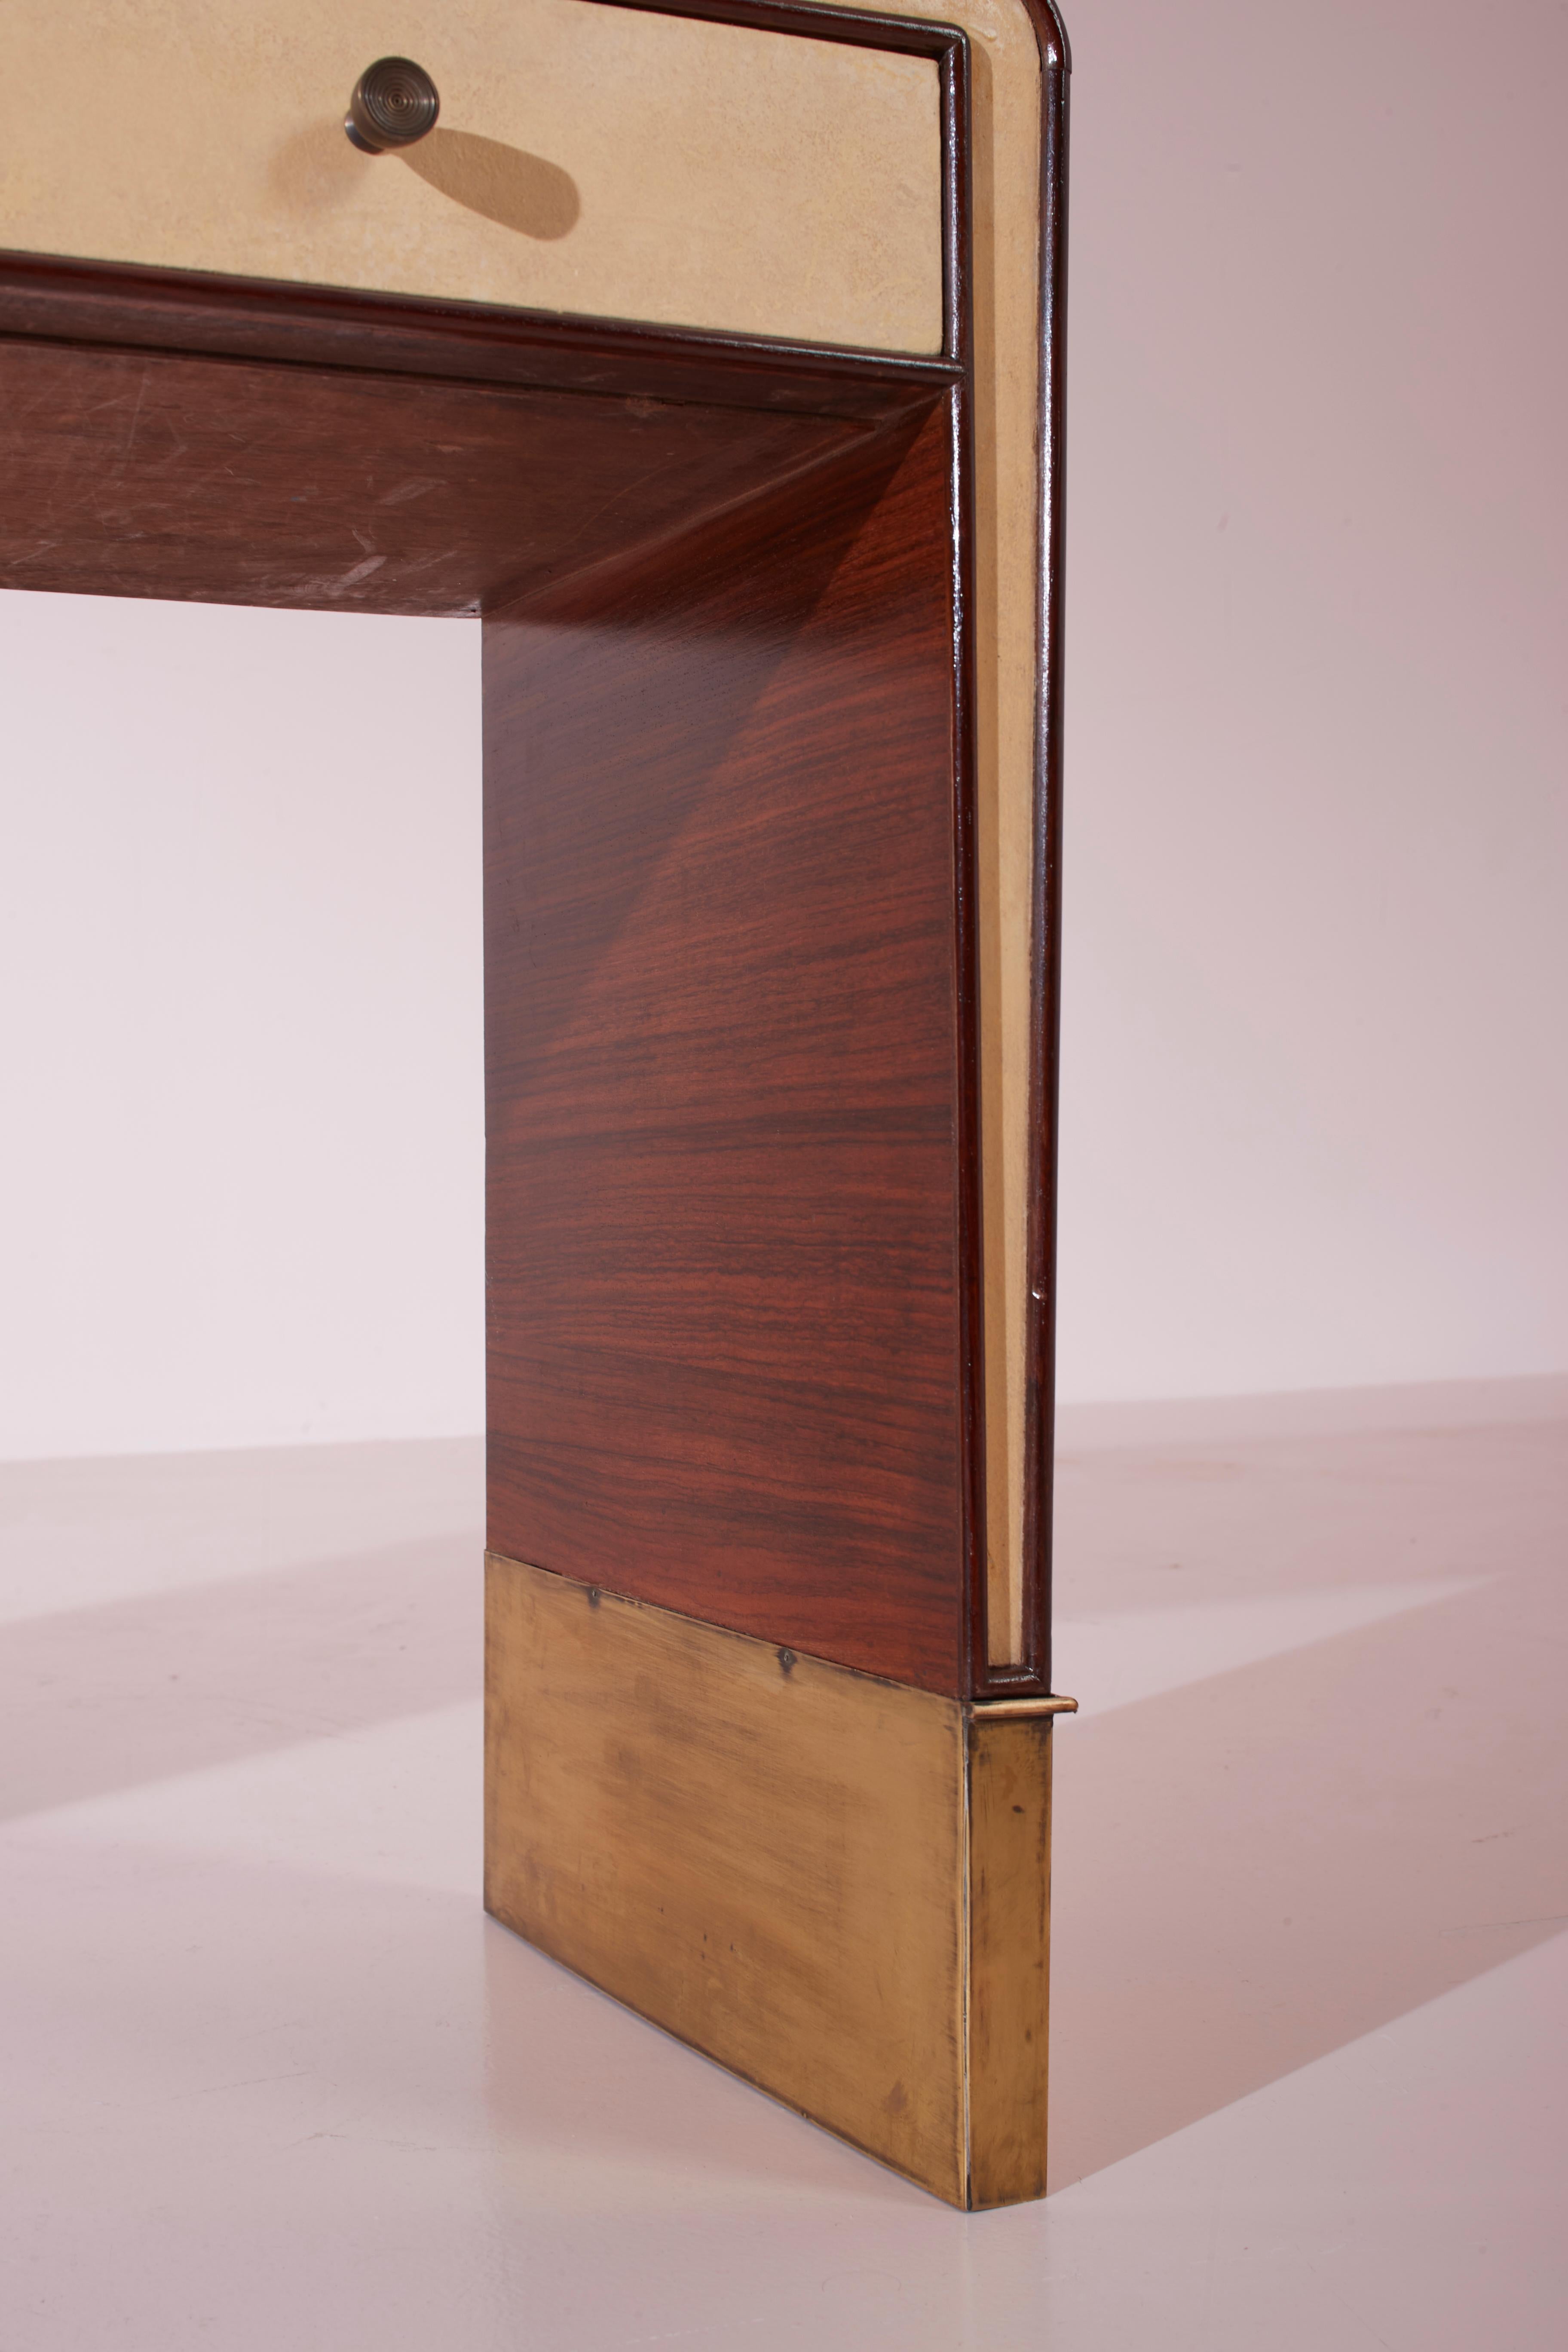 Gio Ponti walnut, parchment, and brass console or dressing table, Italy, 1930s For Sale 4